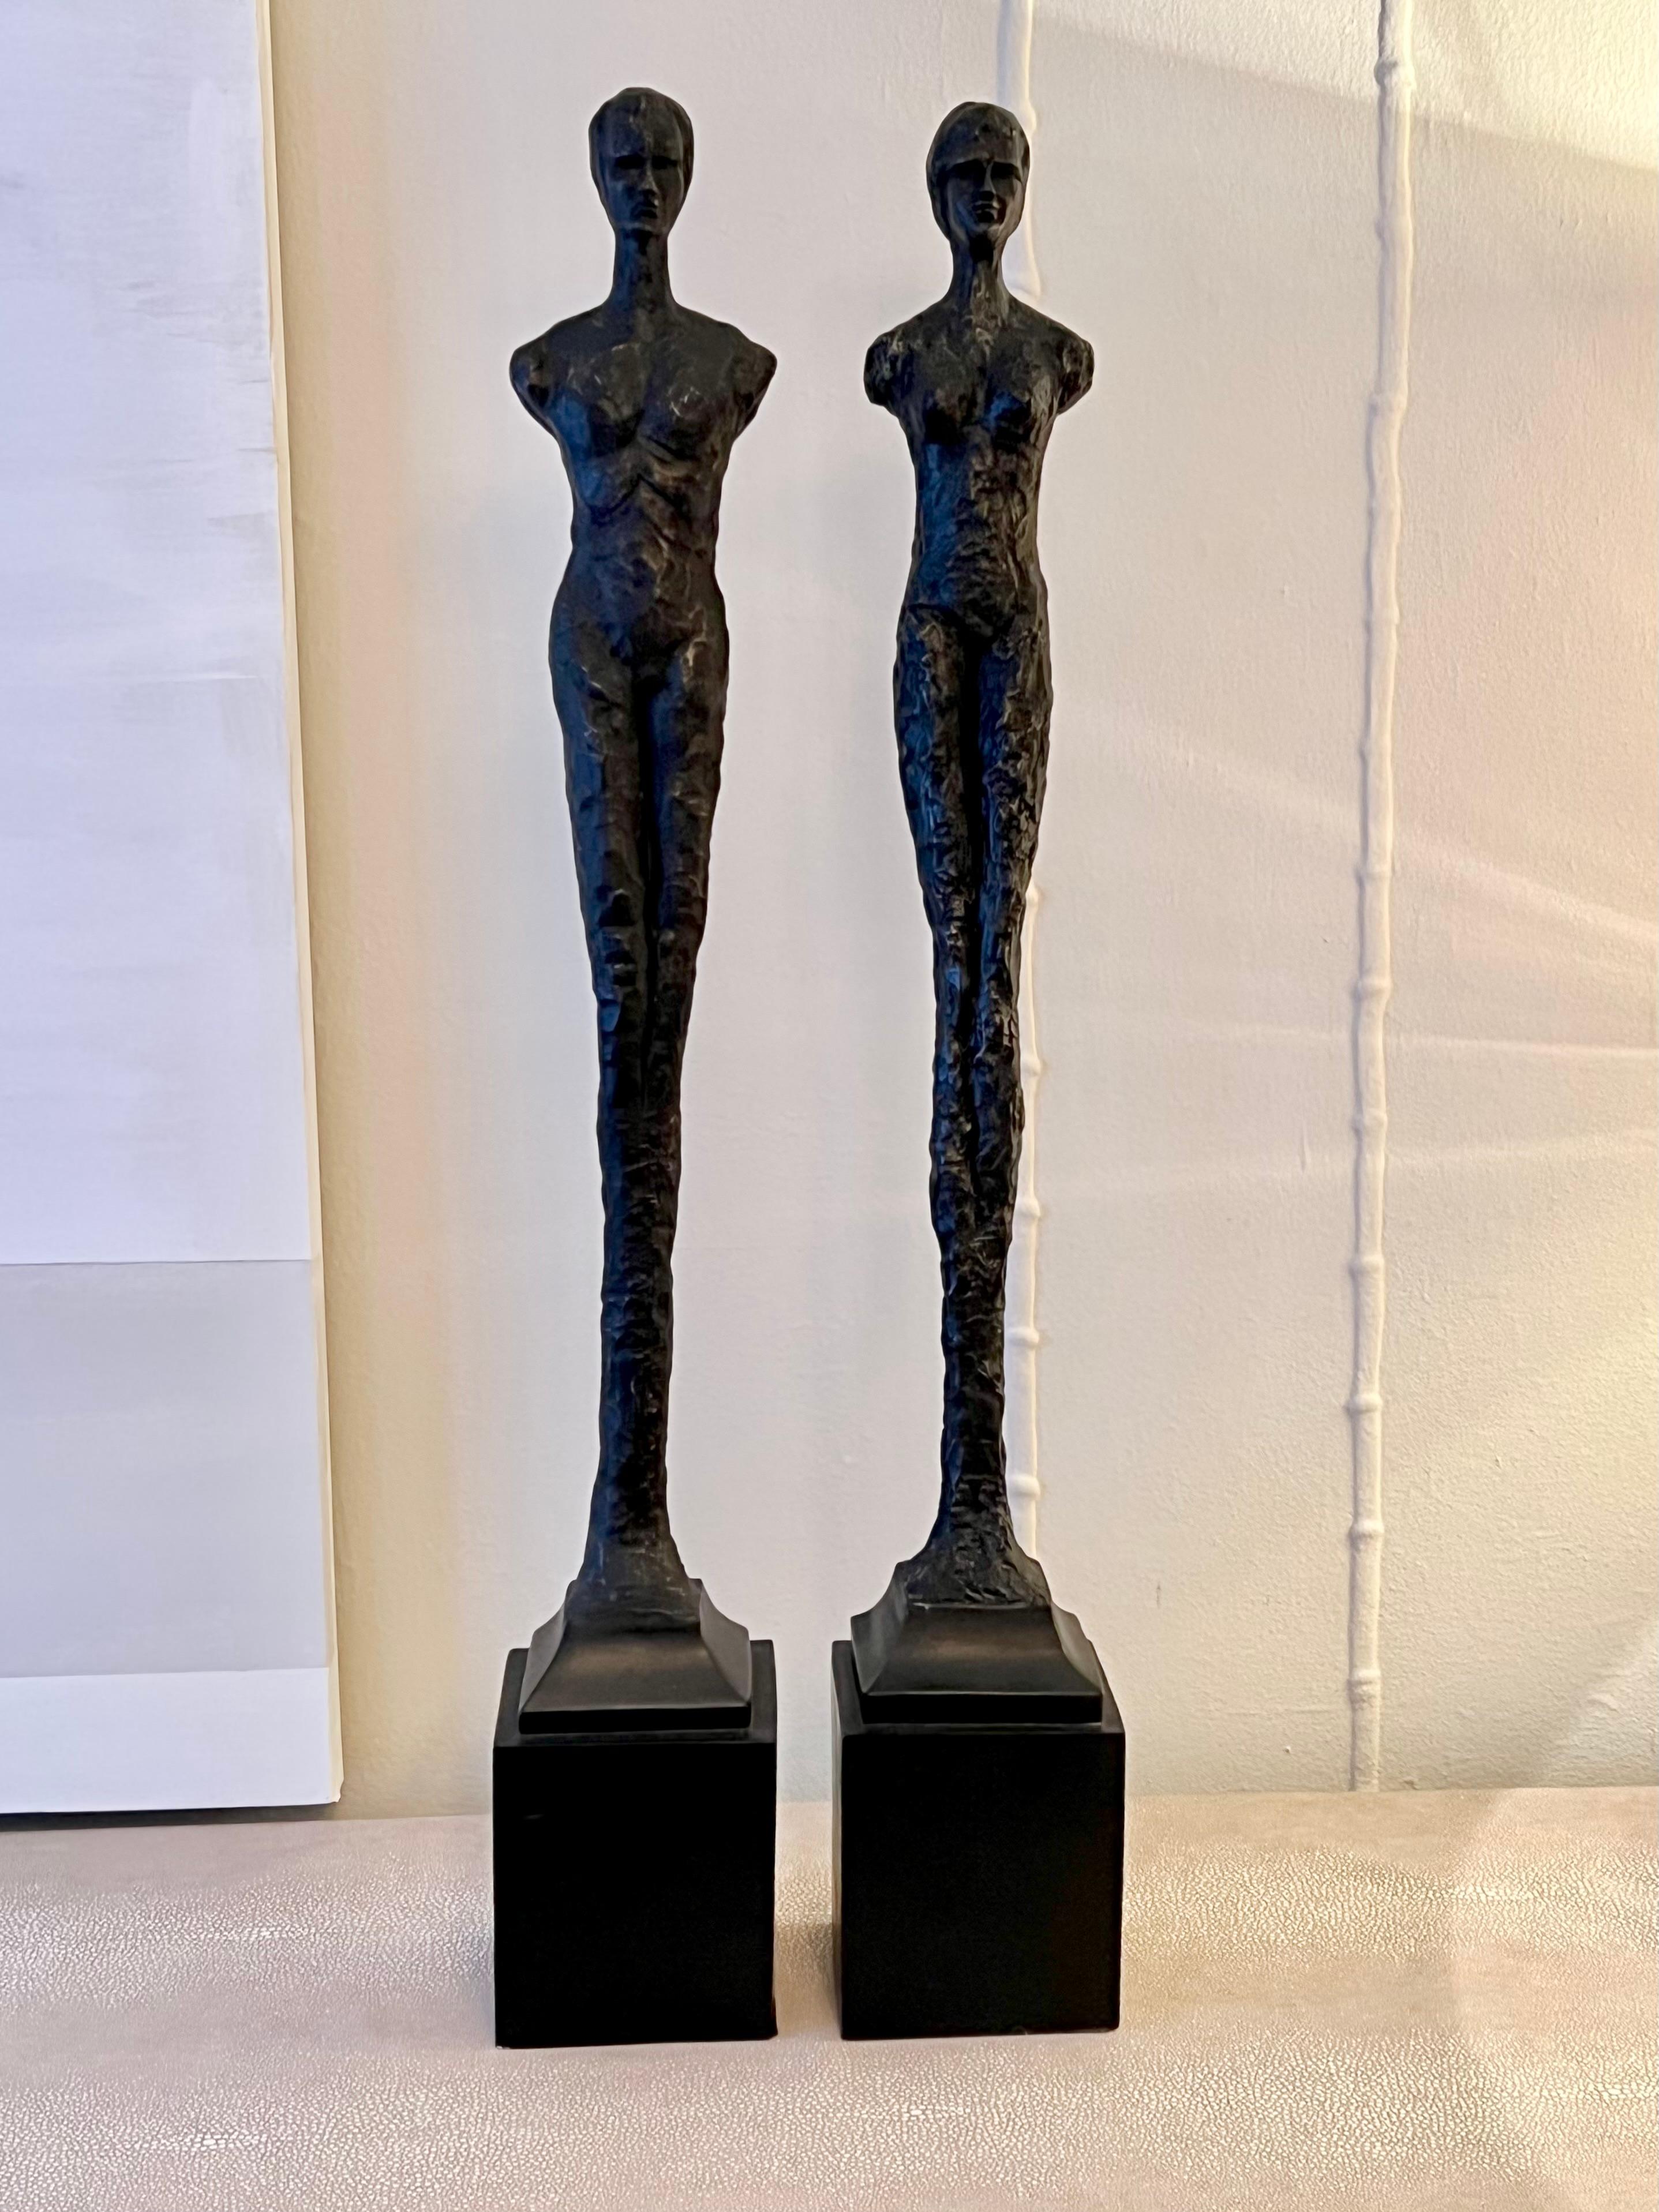 Molded Pair of Figurative Statues in the Style of Giacometti